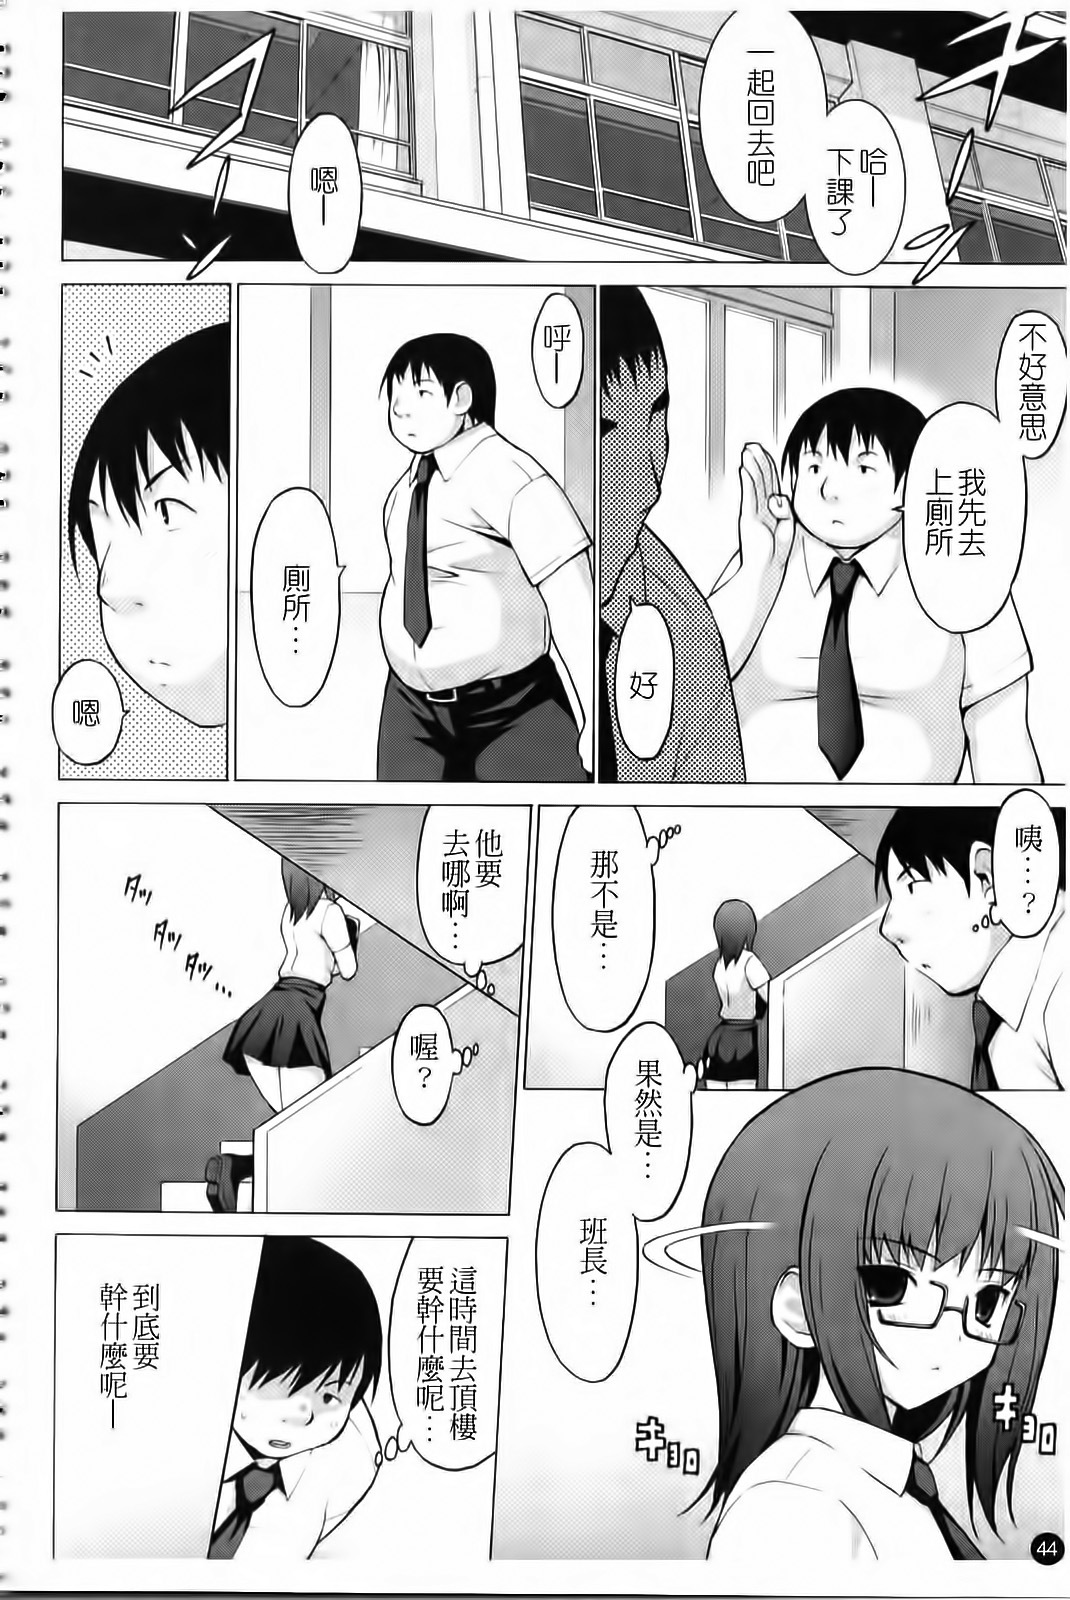 [Onomeshin] Oppai Party [Chinese] page 45 full